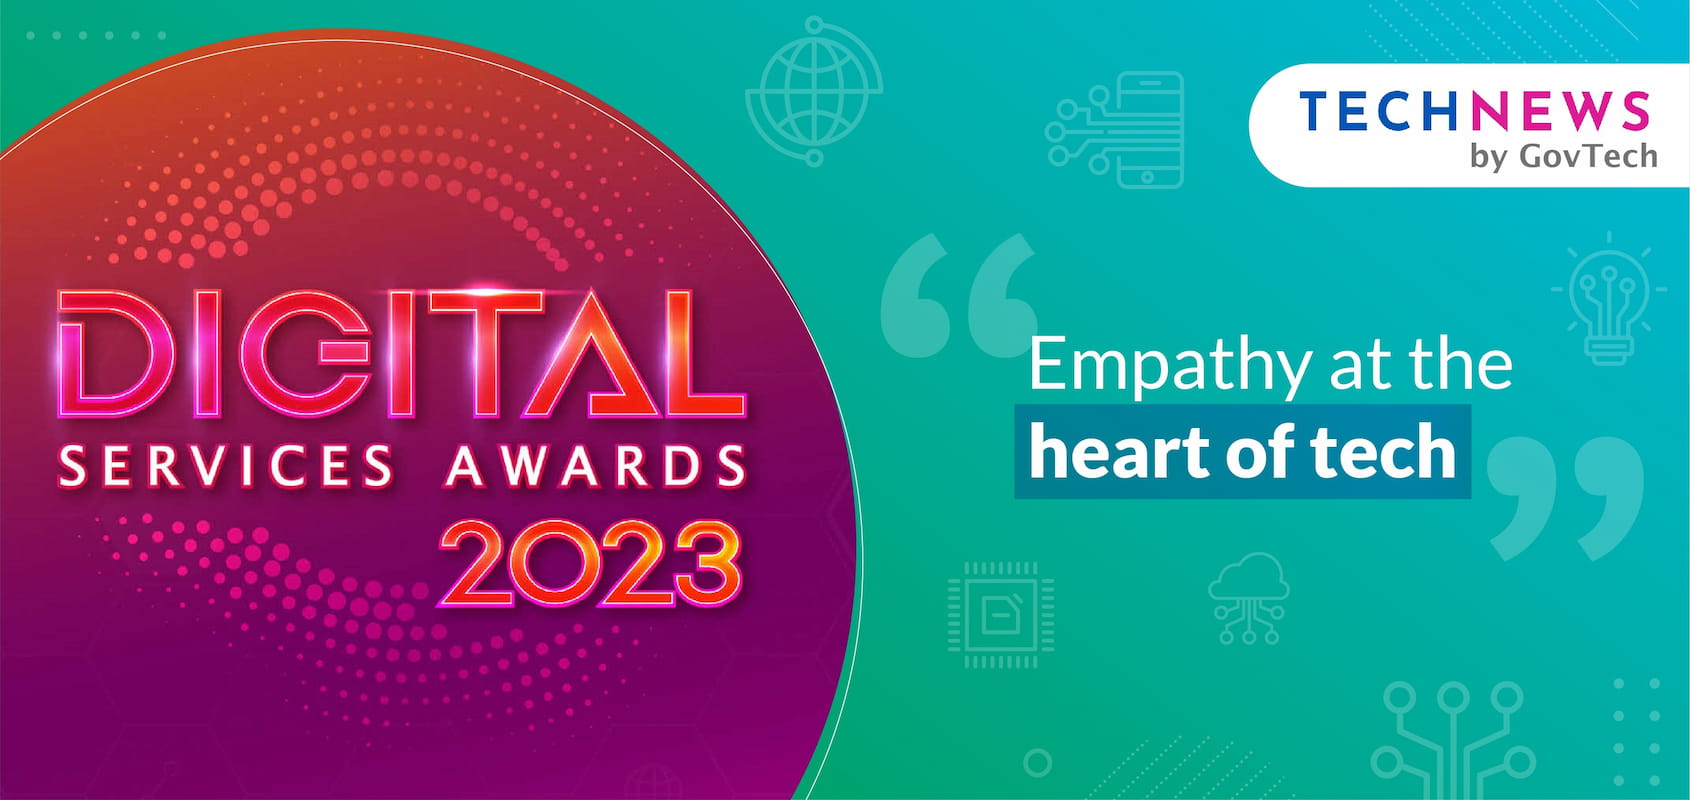 Explore the future of empathetic technology with GovTech at the Digital Services Awards 2023